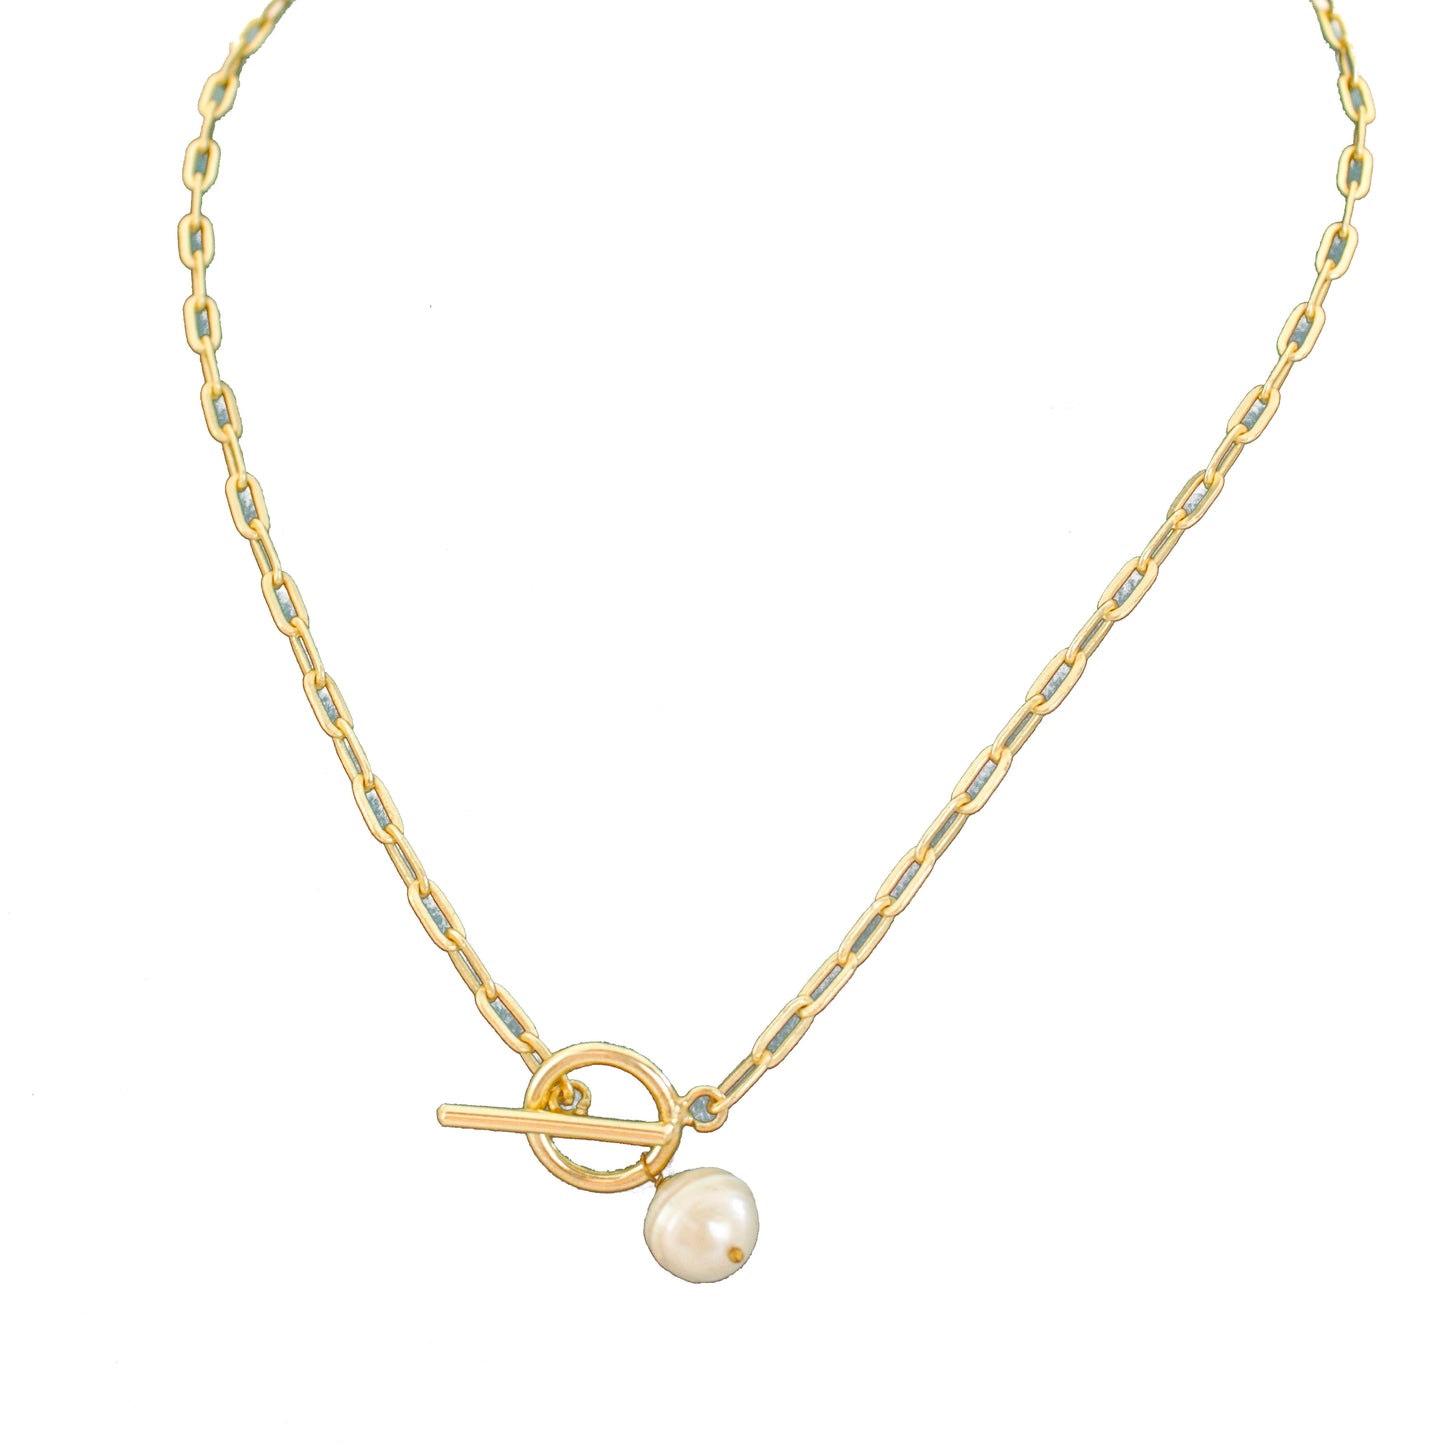 Sparkling Golden Neckpiece with Pearl Charm - The Bling Girll